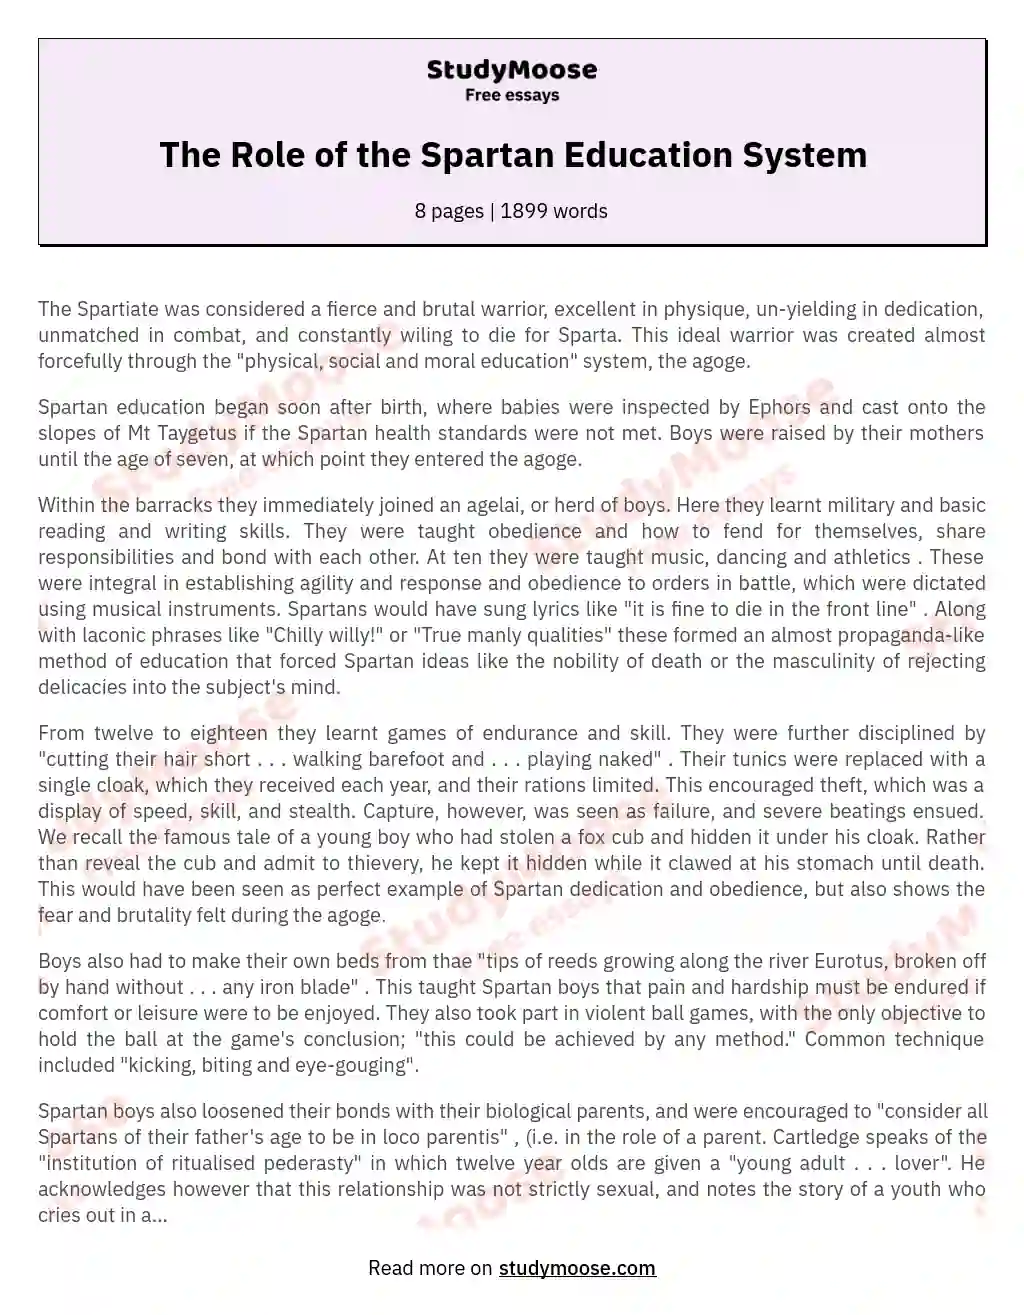 The Role of the Spartan Education System essay